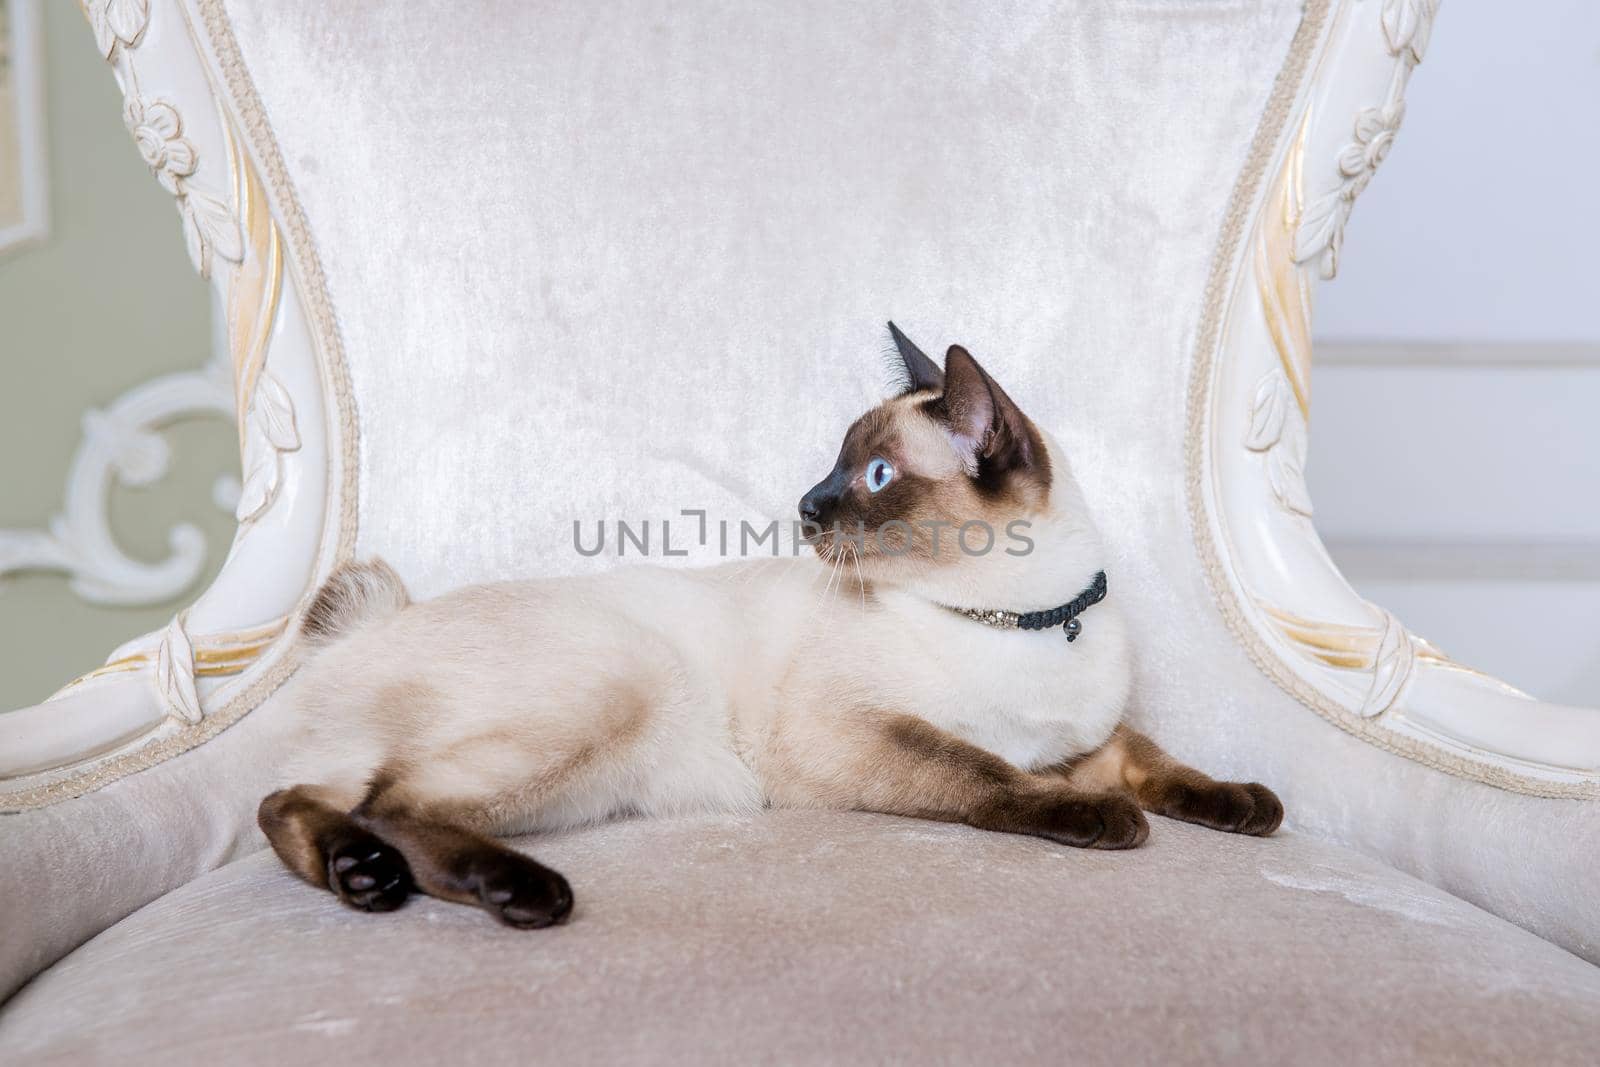 The theme of decoration and jewelry for animals. Beautiful cat woman posing on a vintage chair in baroque interior. Mekogon Bobtail or Thai cat without a tail with a necklace on its neck by Tomashevska